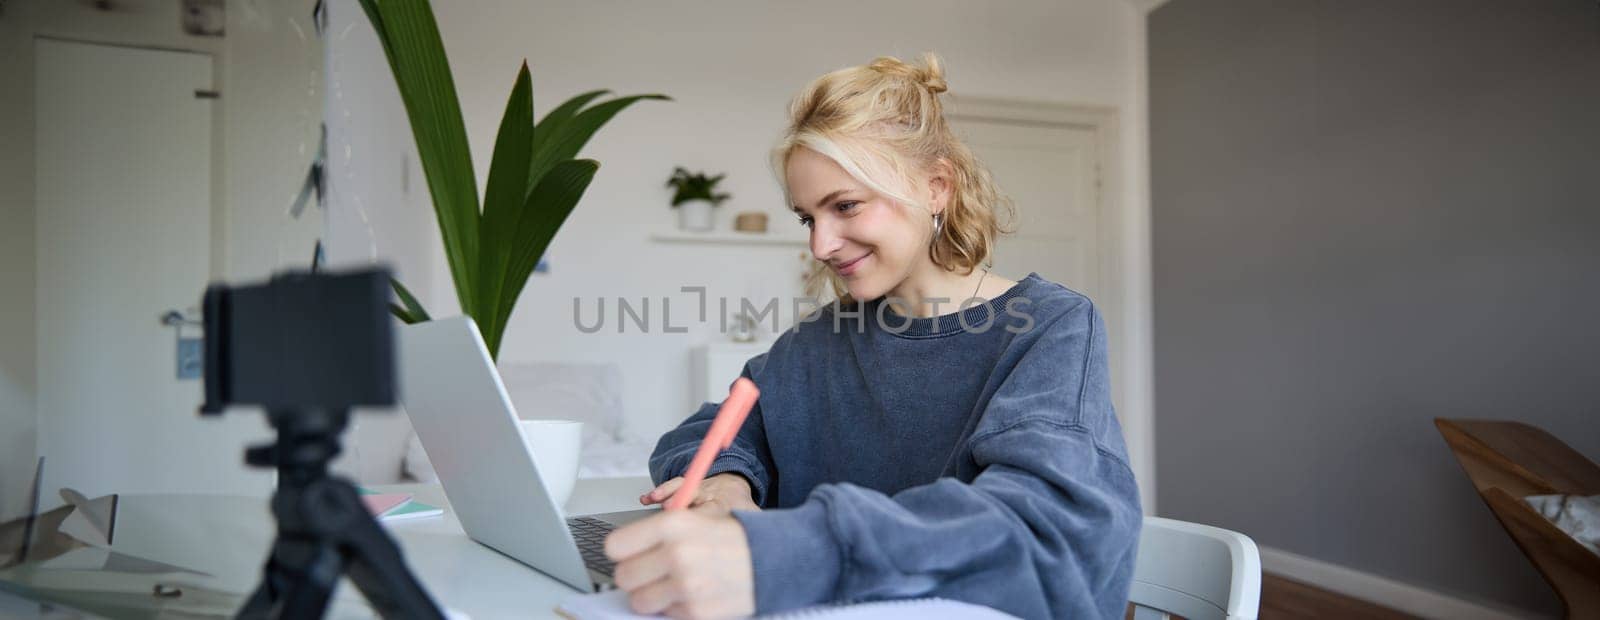 Portrait of smiling blond woman writing in notebook, making notes, recording content for social medial on digital camera, looking at laptop, working or studying.